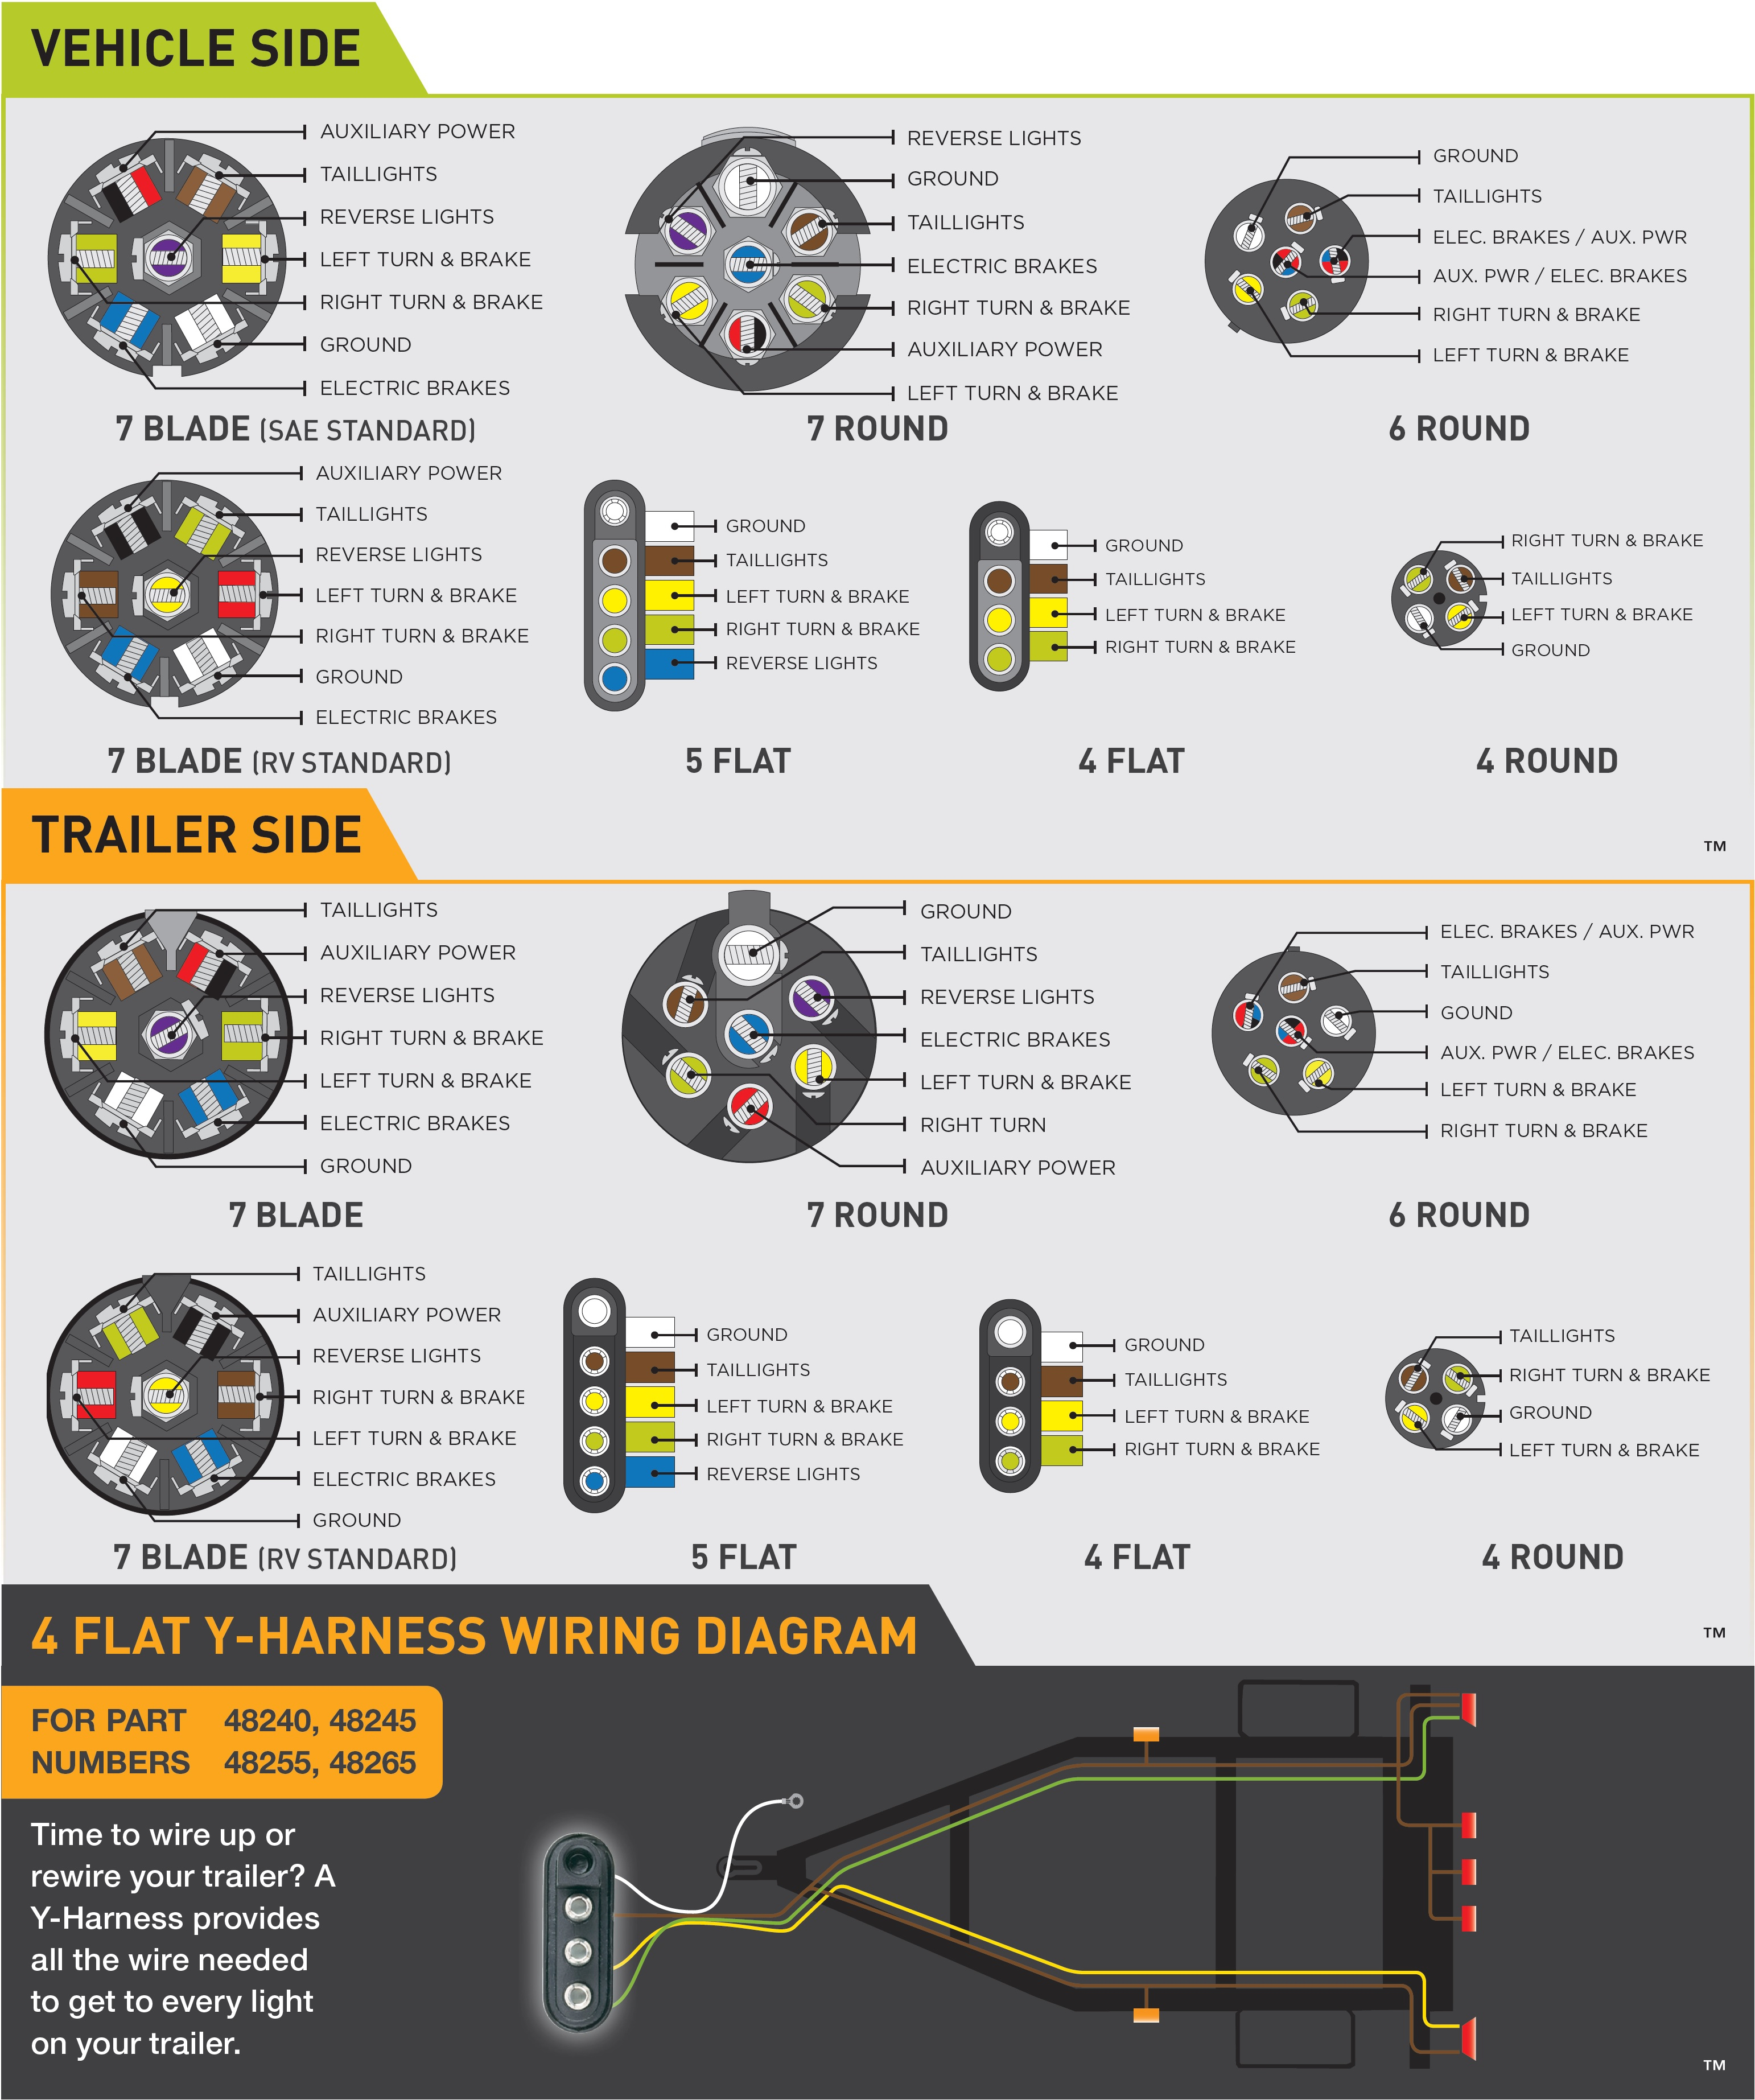 Wiring Guides - Wiring Diagram For A Trailer